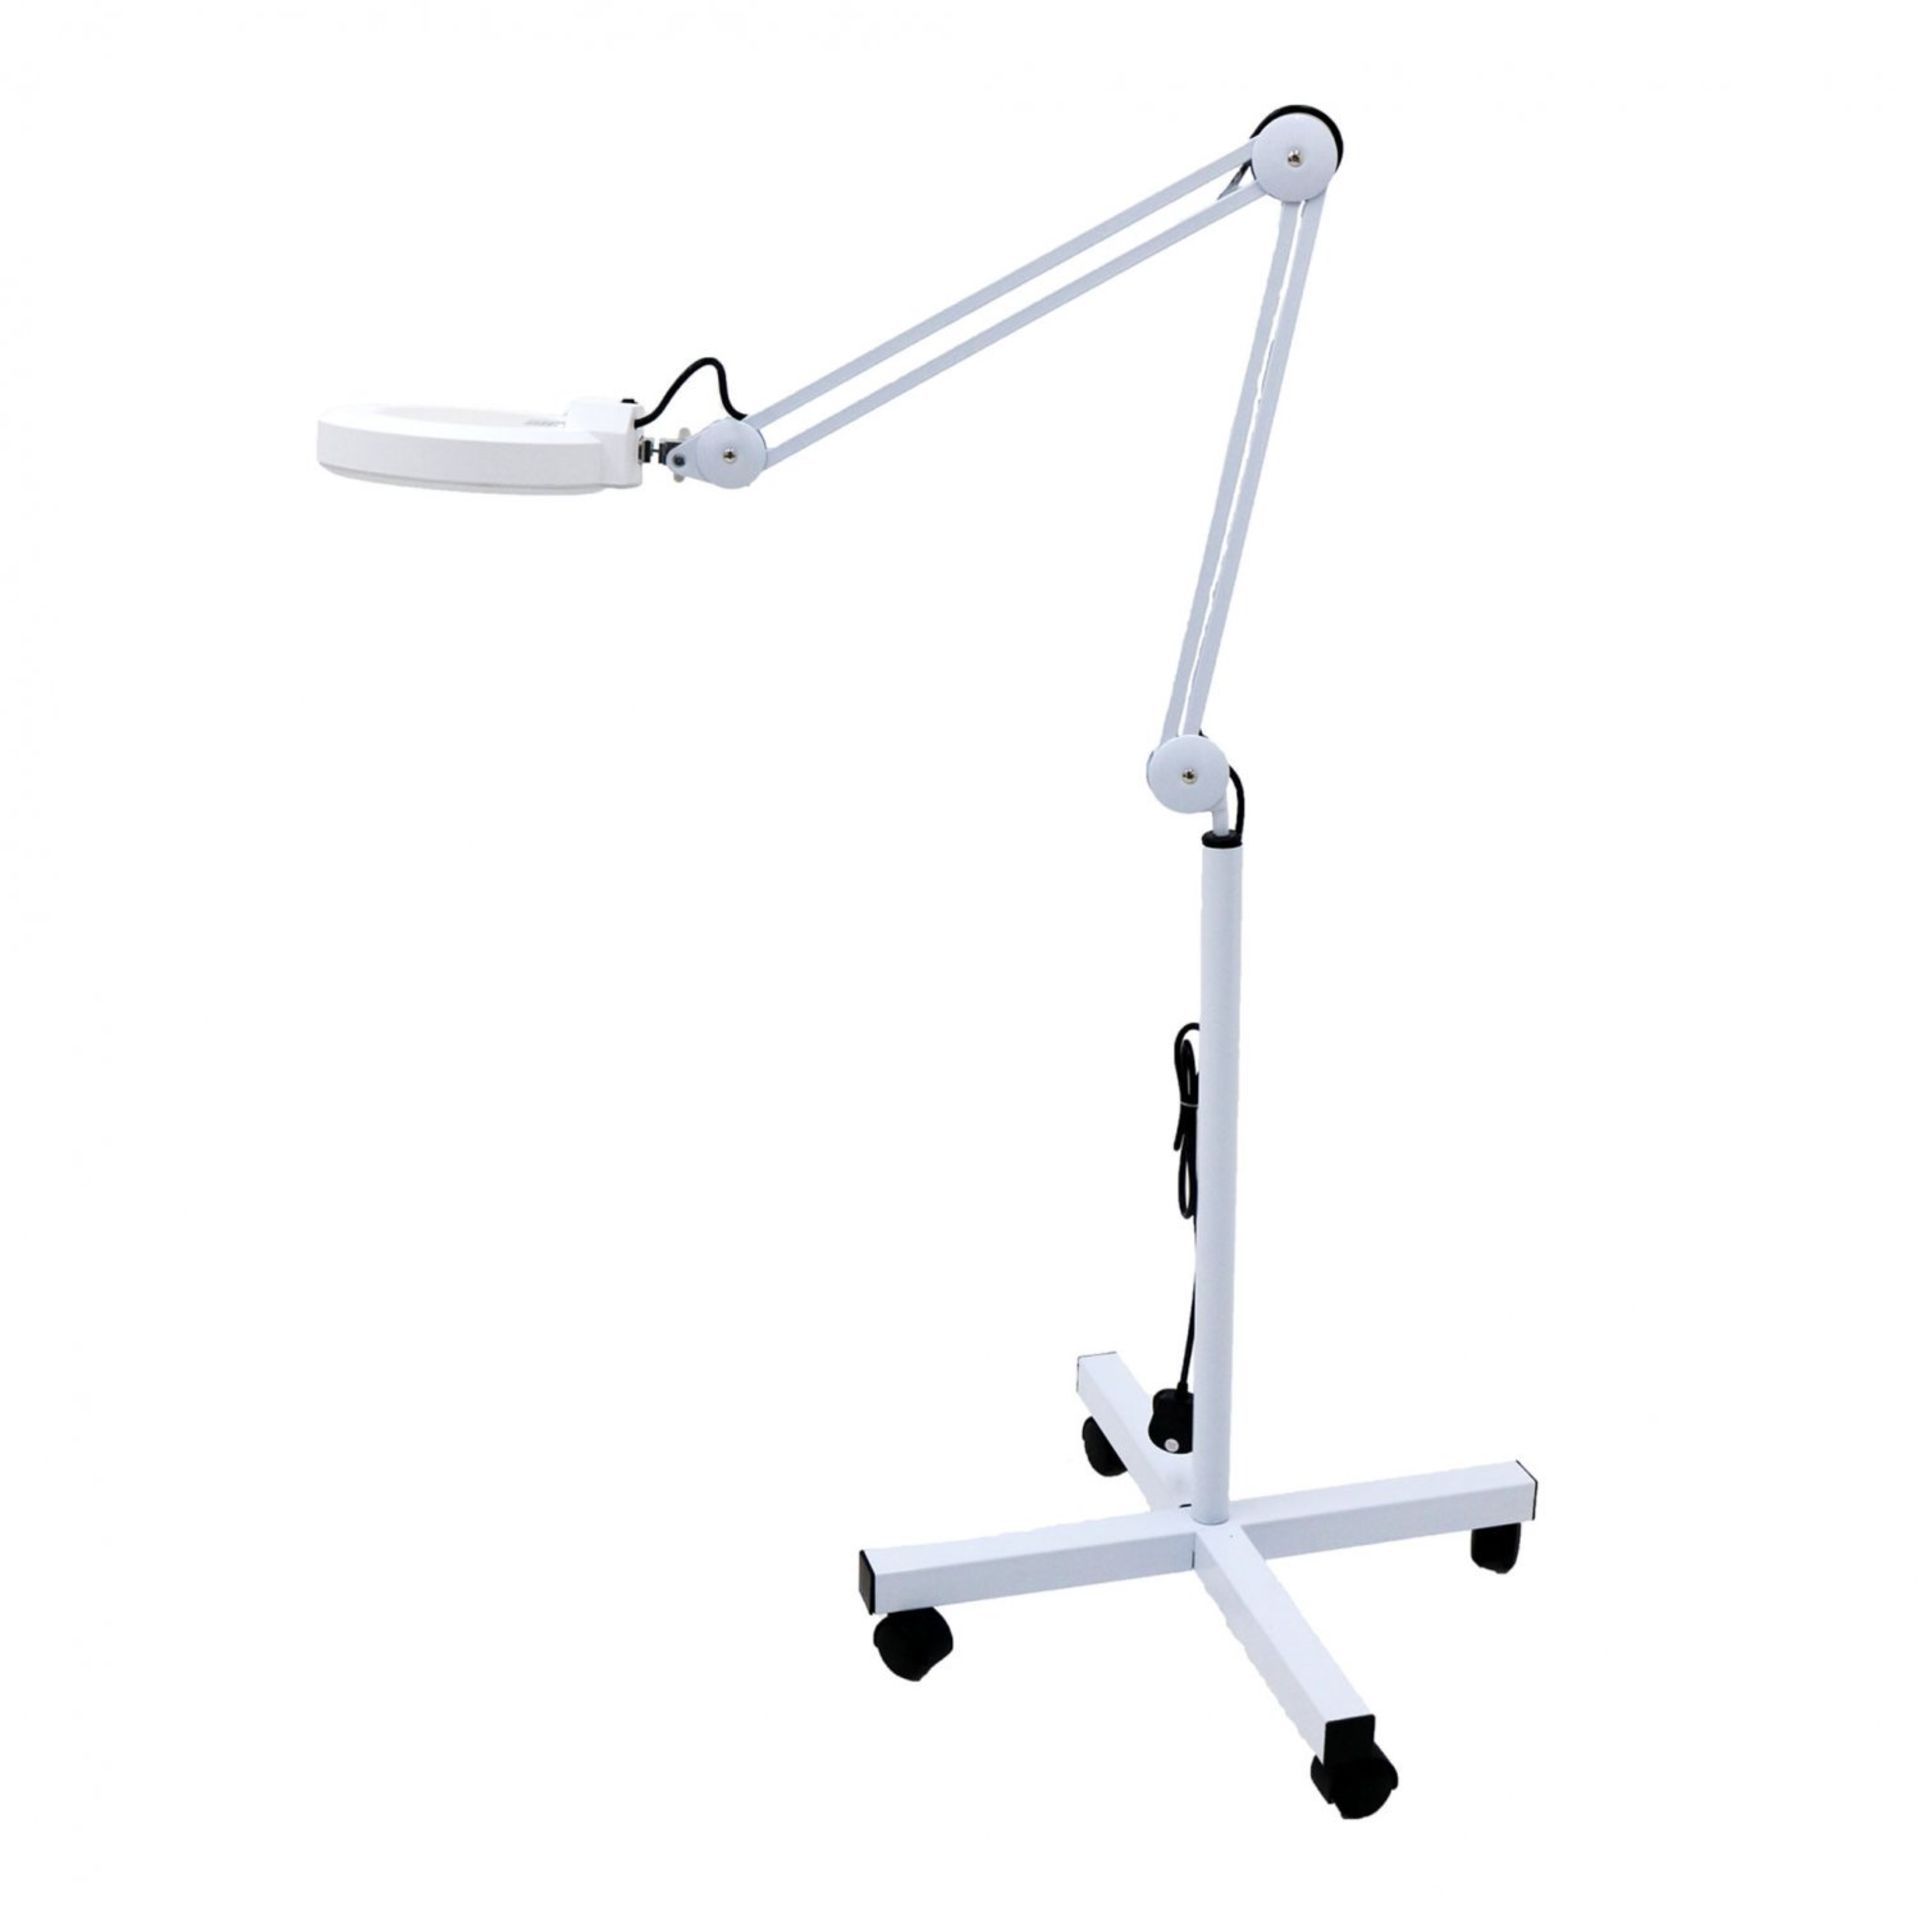 (F20) Floor Standing Magnifier Lamp with 5x Magnification Fully Adjustable in all Positions A...